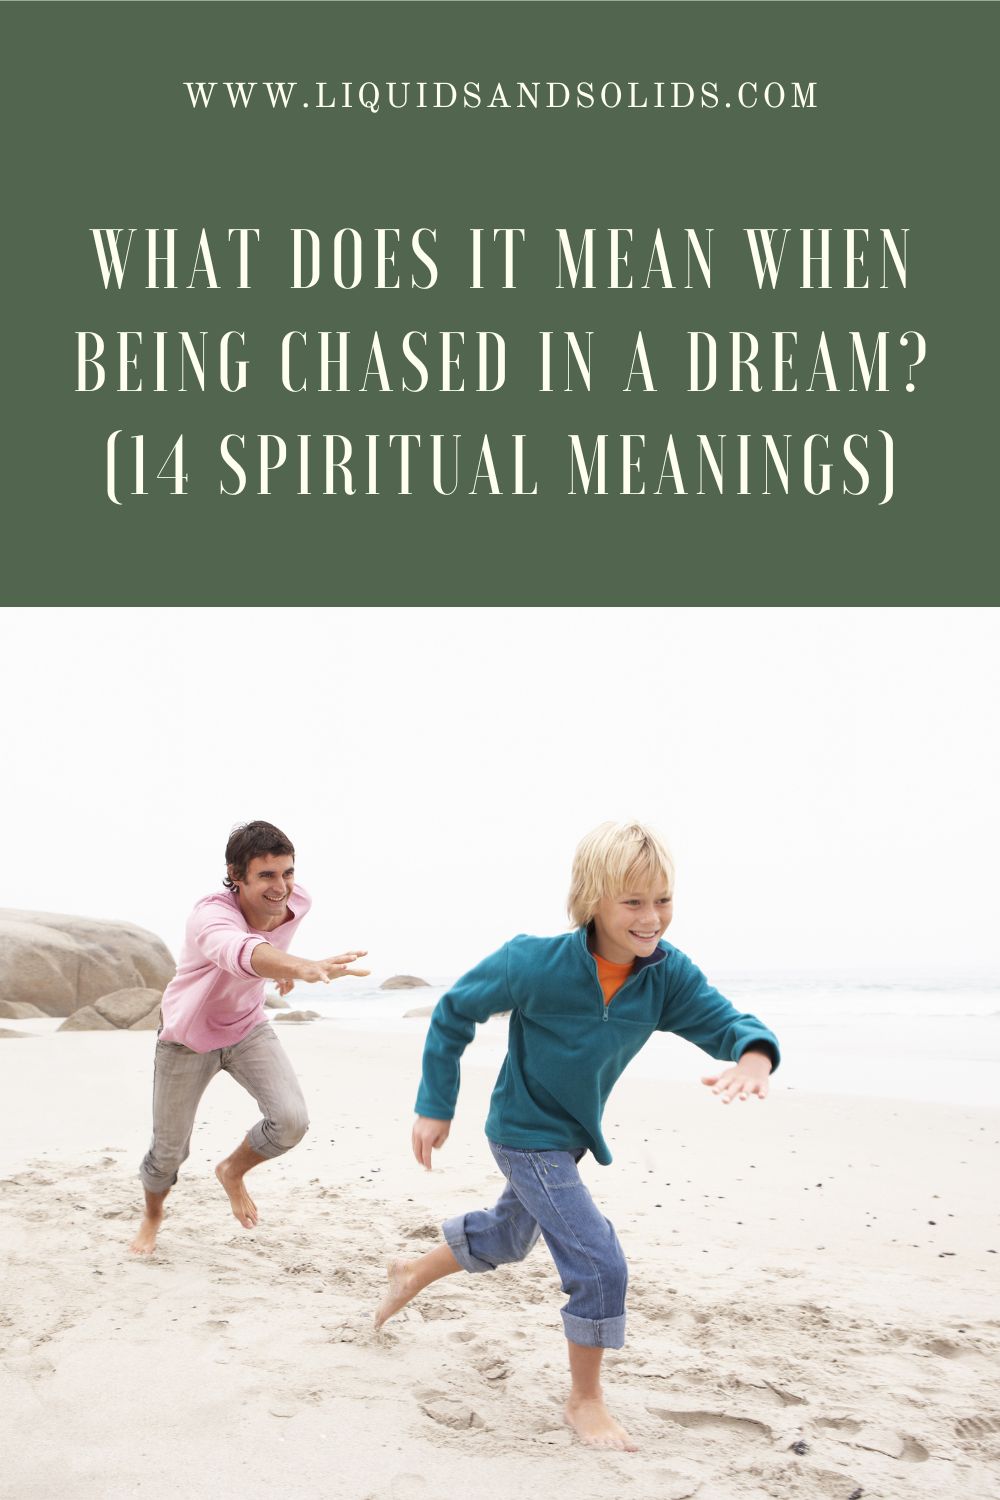 What Does It Mean When You Dream About Getting Chased?